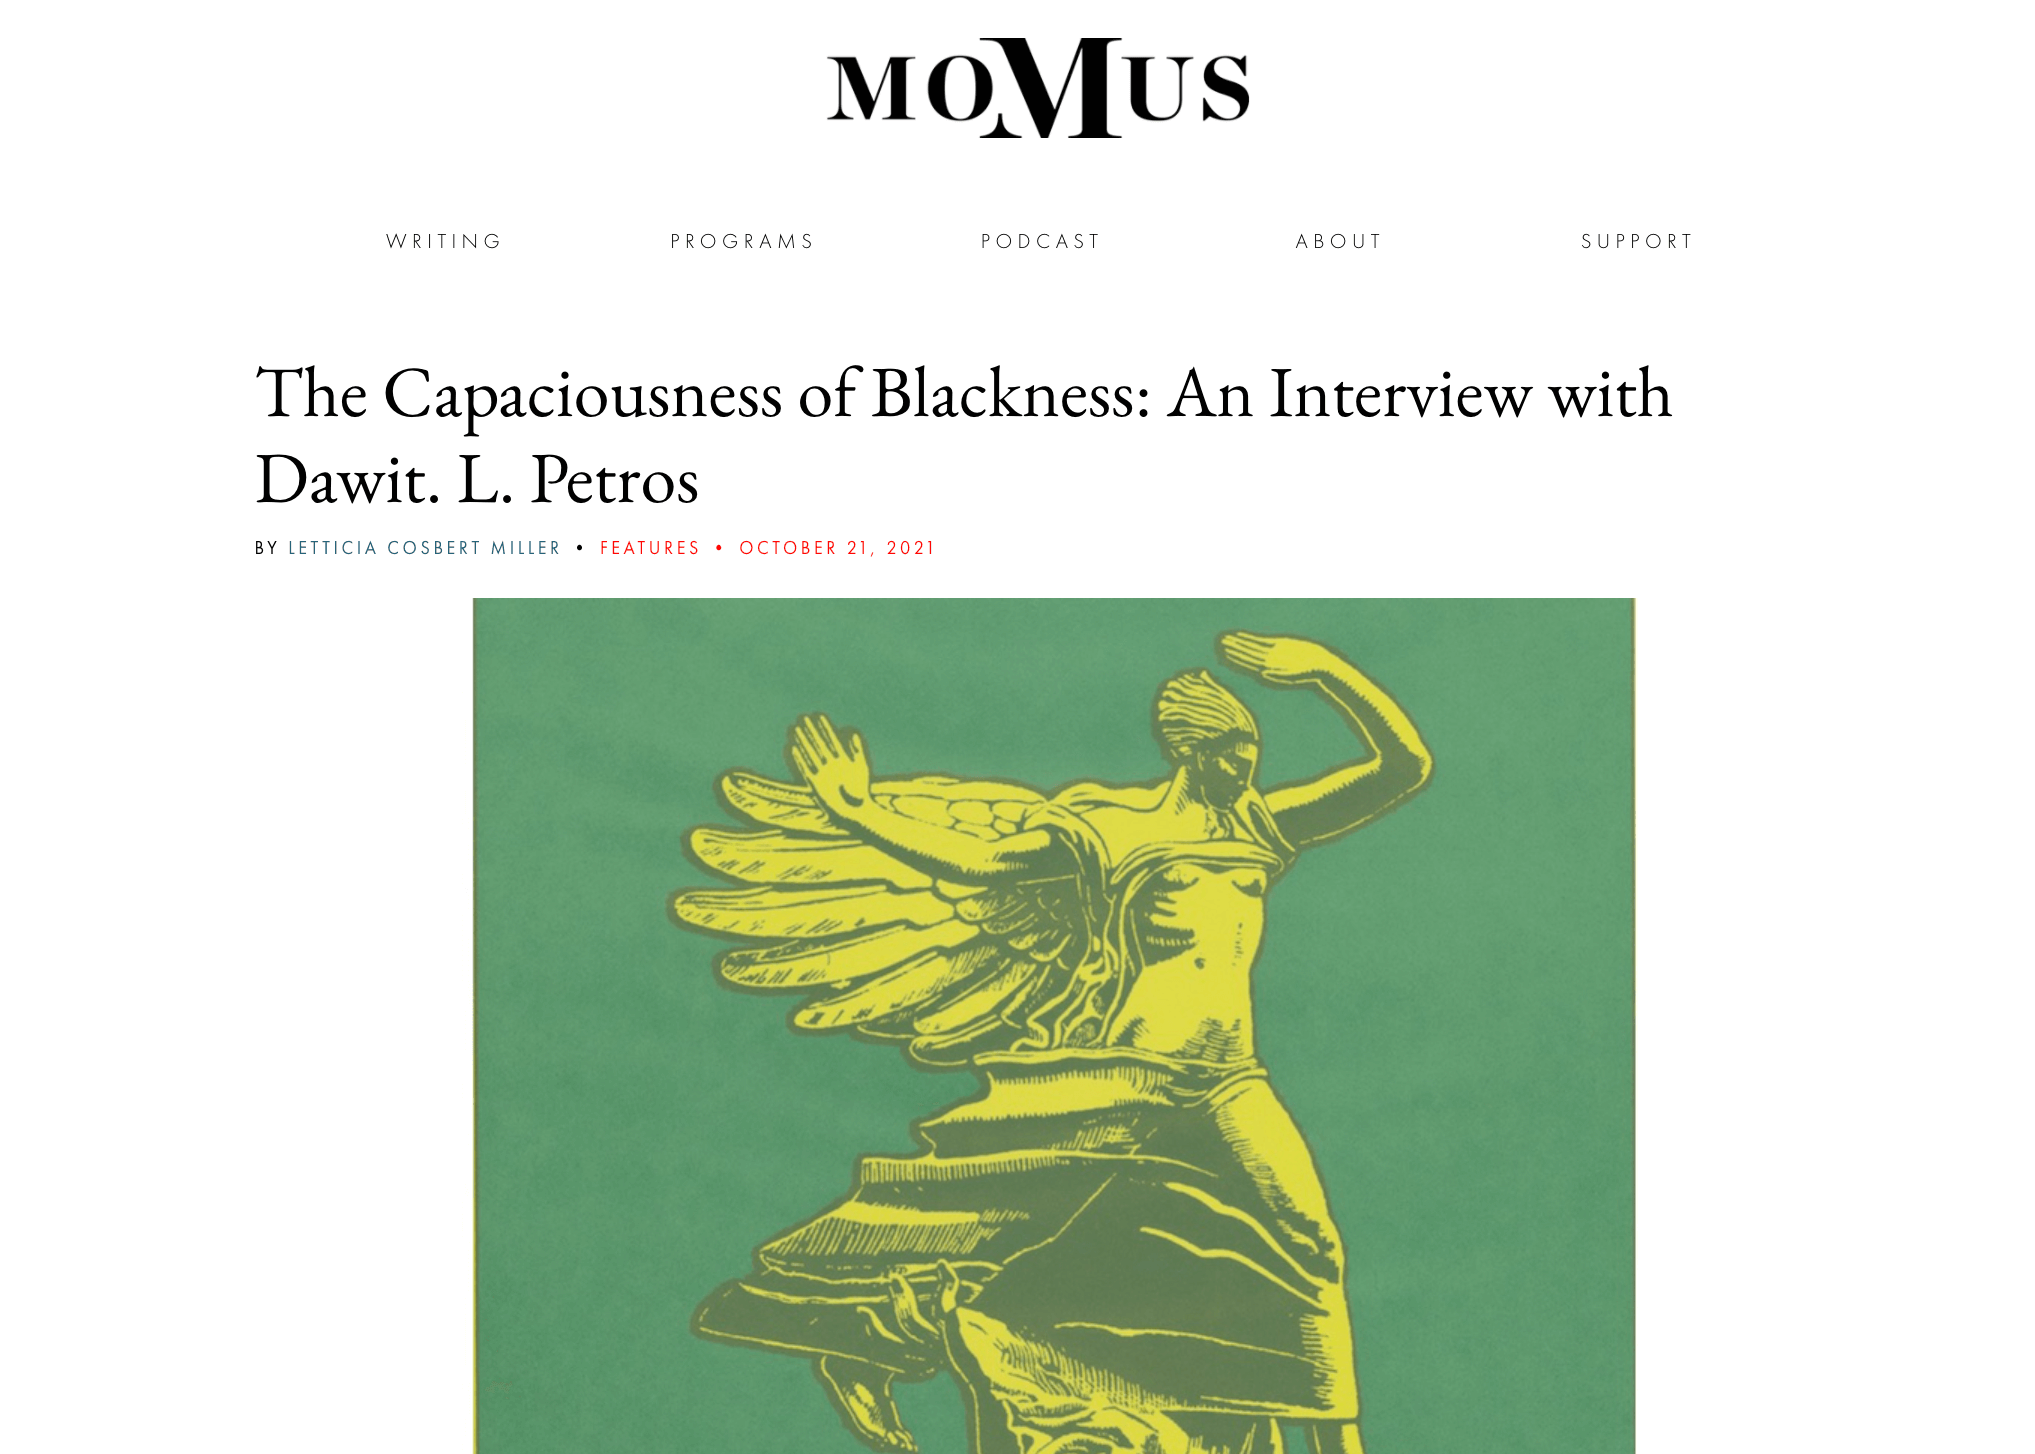 Dawit L. Petros: an interview published on Momus